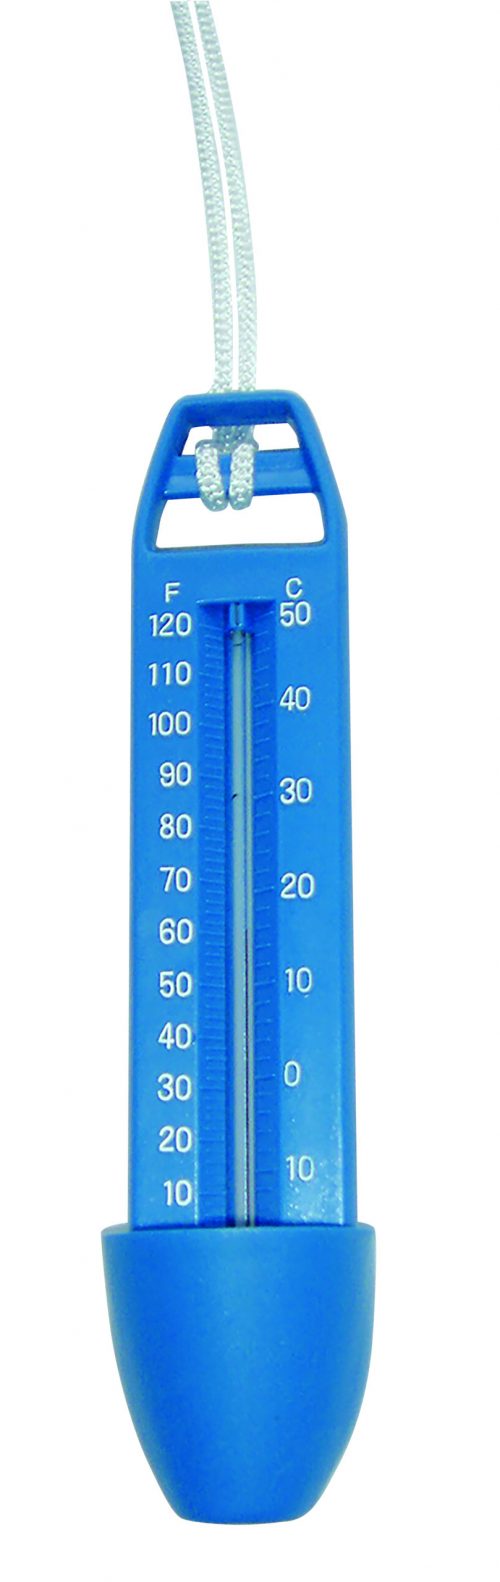 502010820 termometer standard 2 scaled